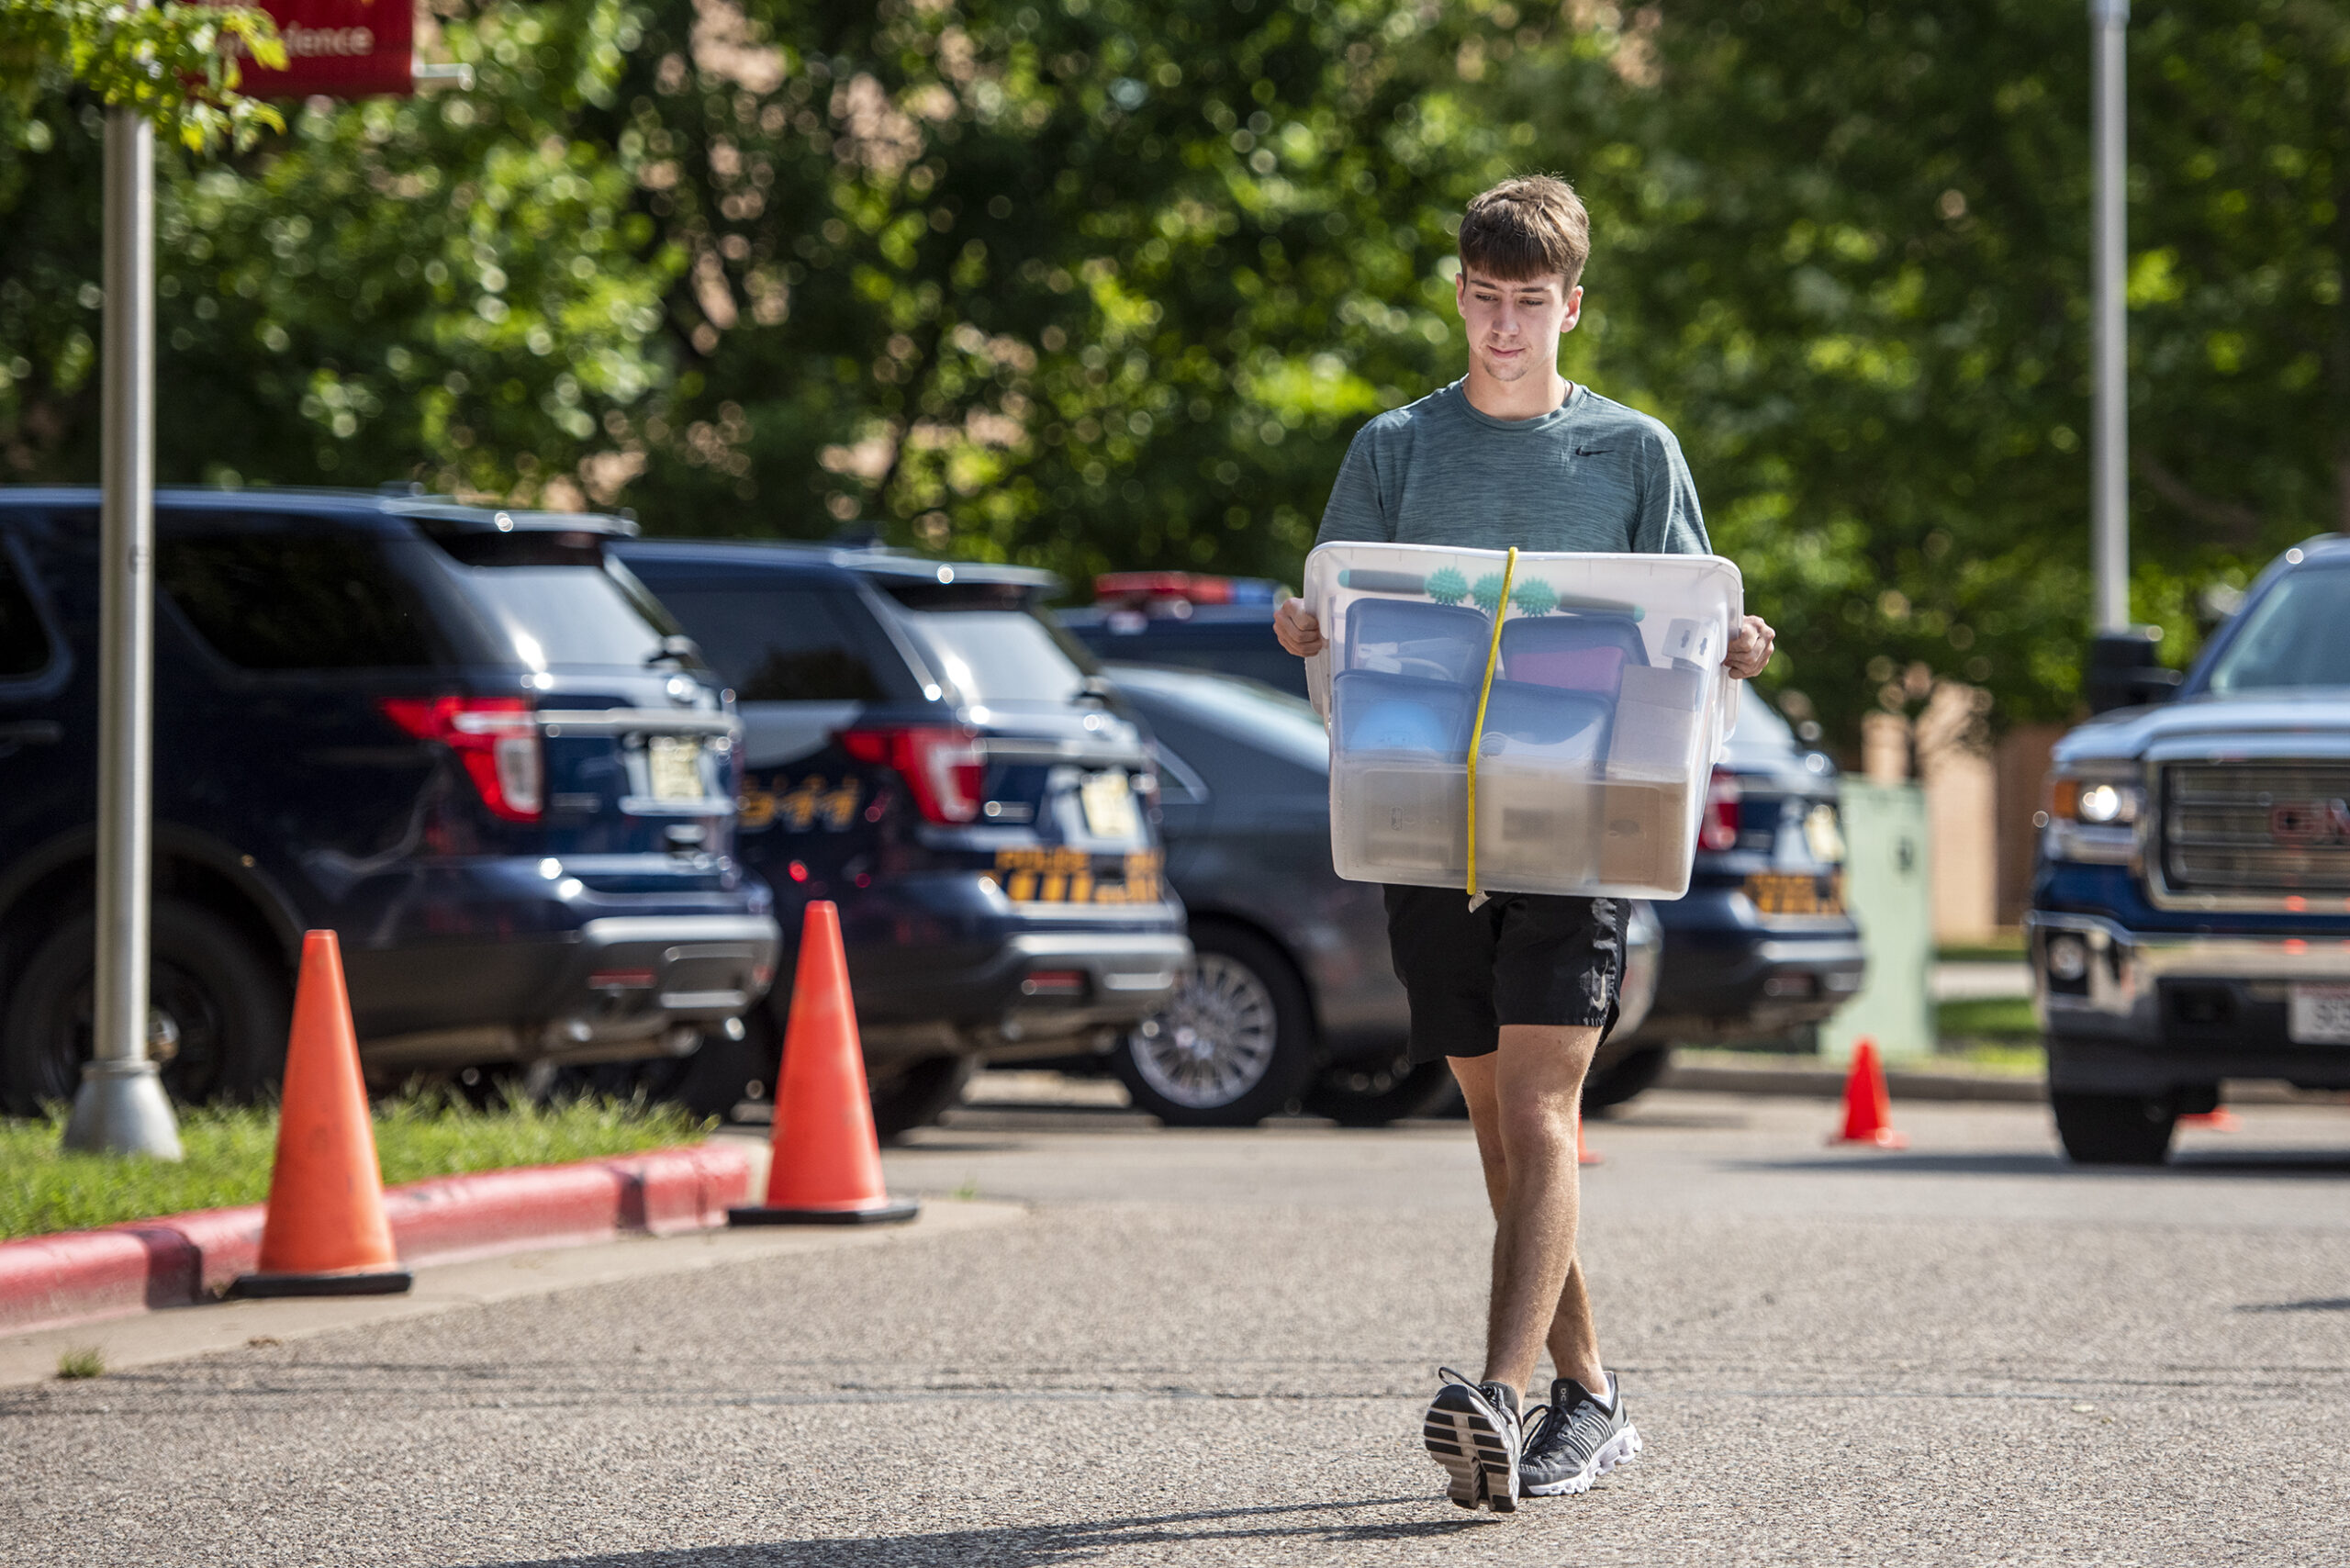 A student holds a clear plastic box as he walks through a parking lot.